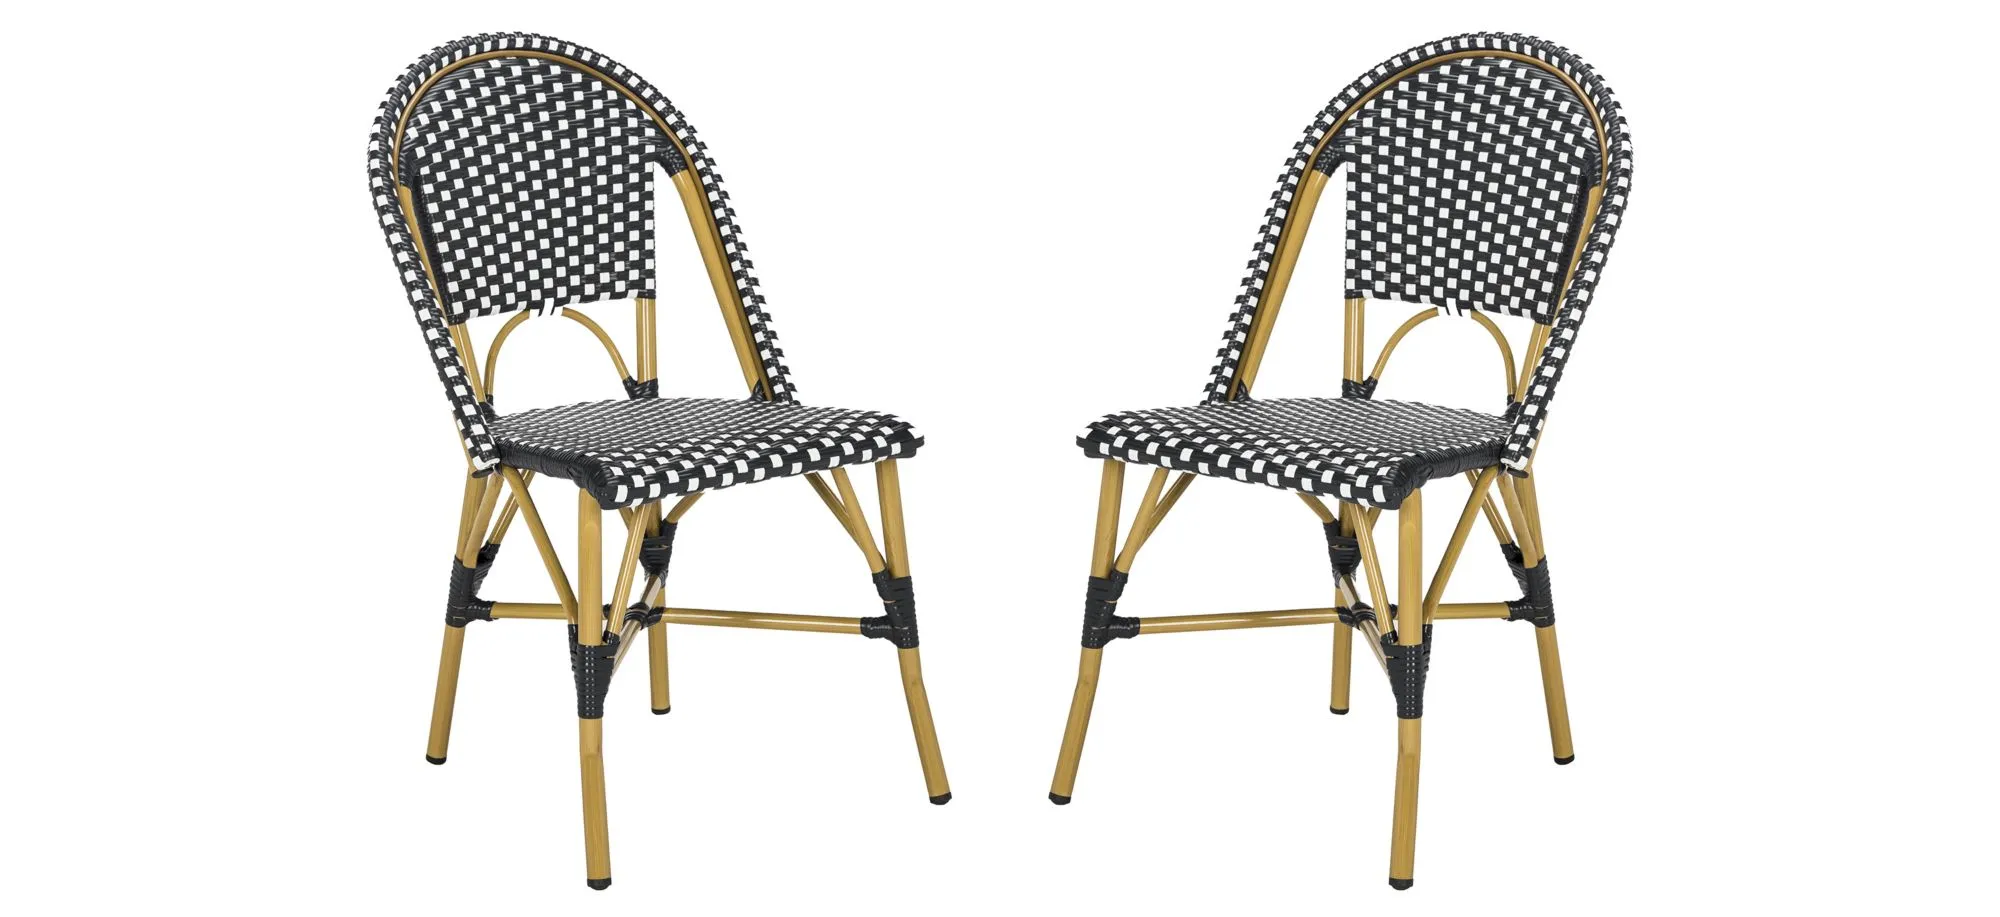 Montez Outdoor French Bistro Side Chair - Set of 2 in Iris by Safavieh